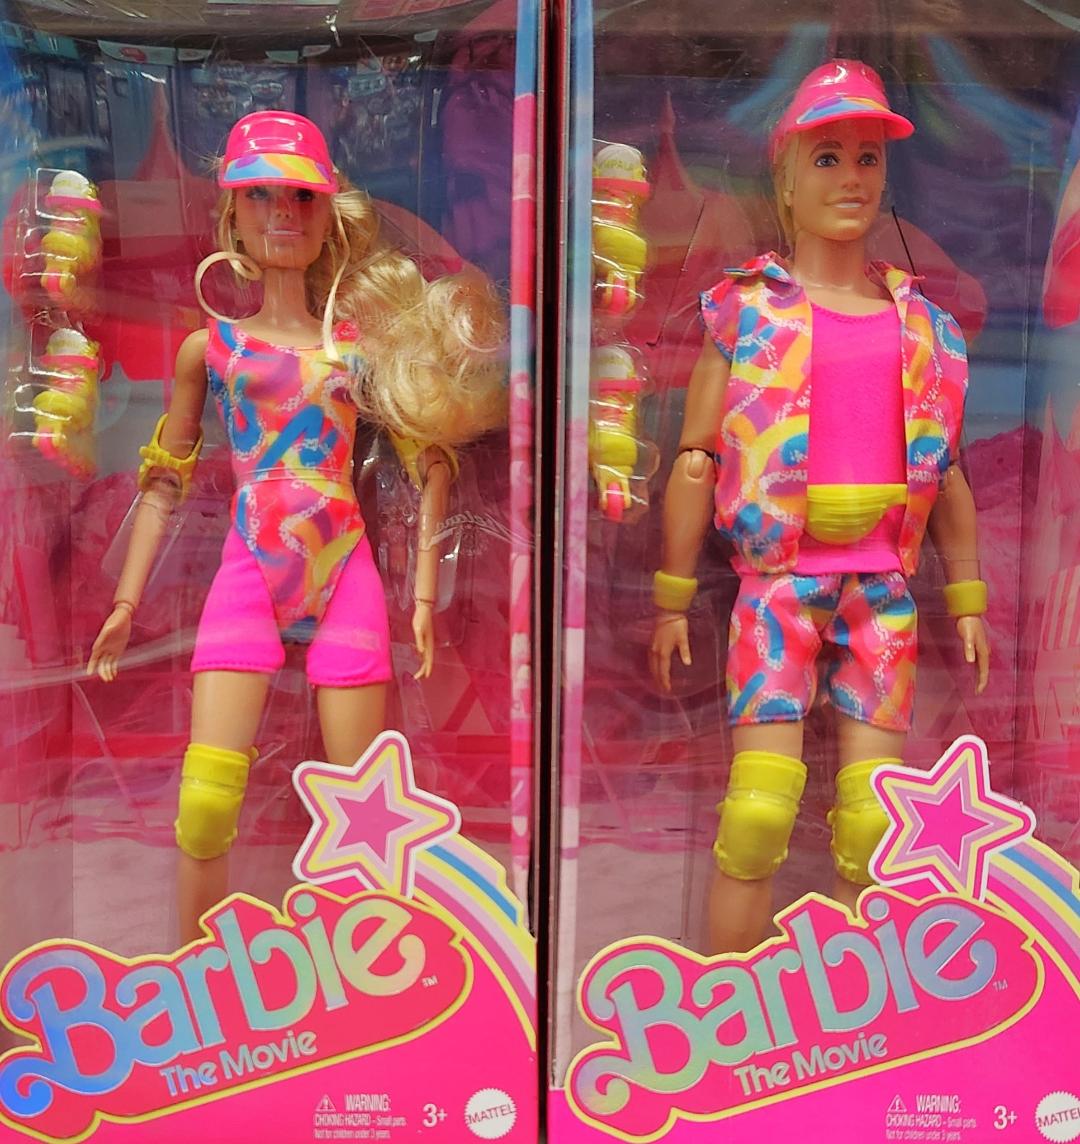 Its Barbie and Ken!